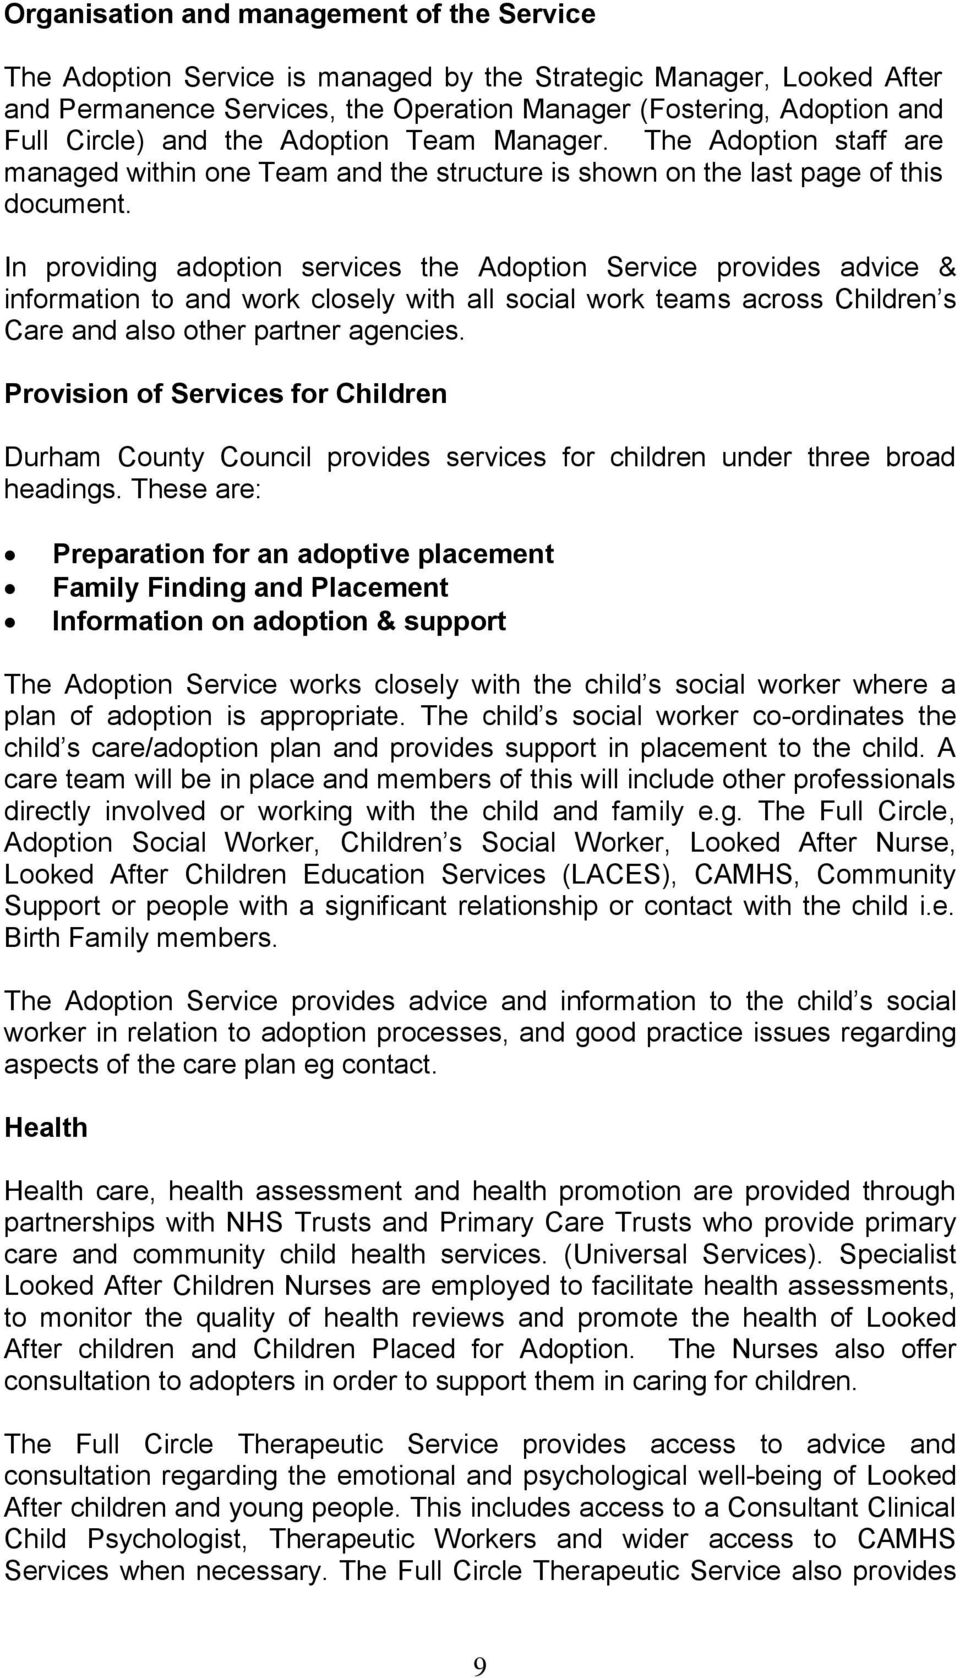 In providing adoption services the Adoption Service provides advice & information to and work closely with all social work teams across Children s Care and also other partner agencies.